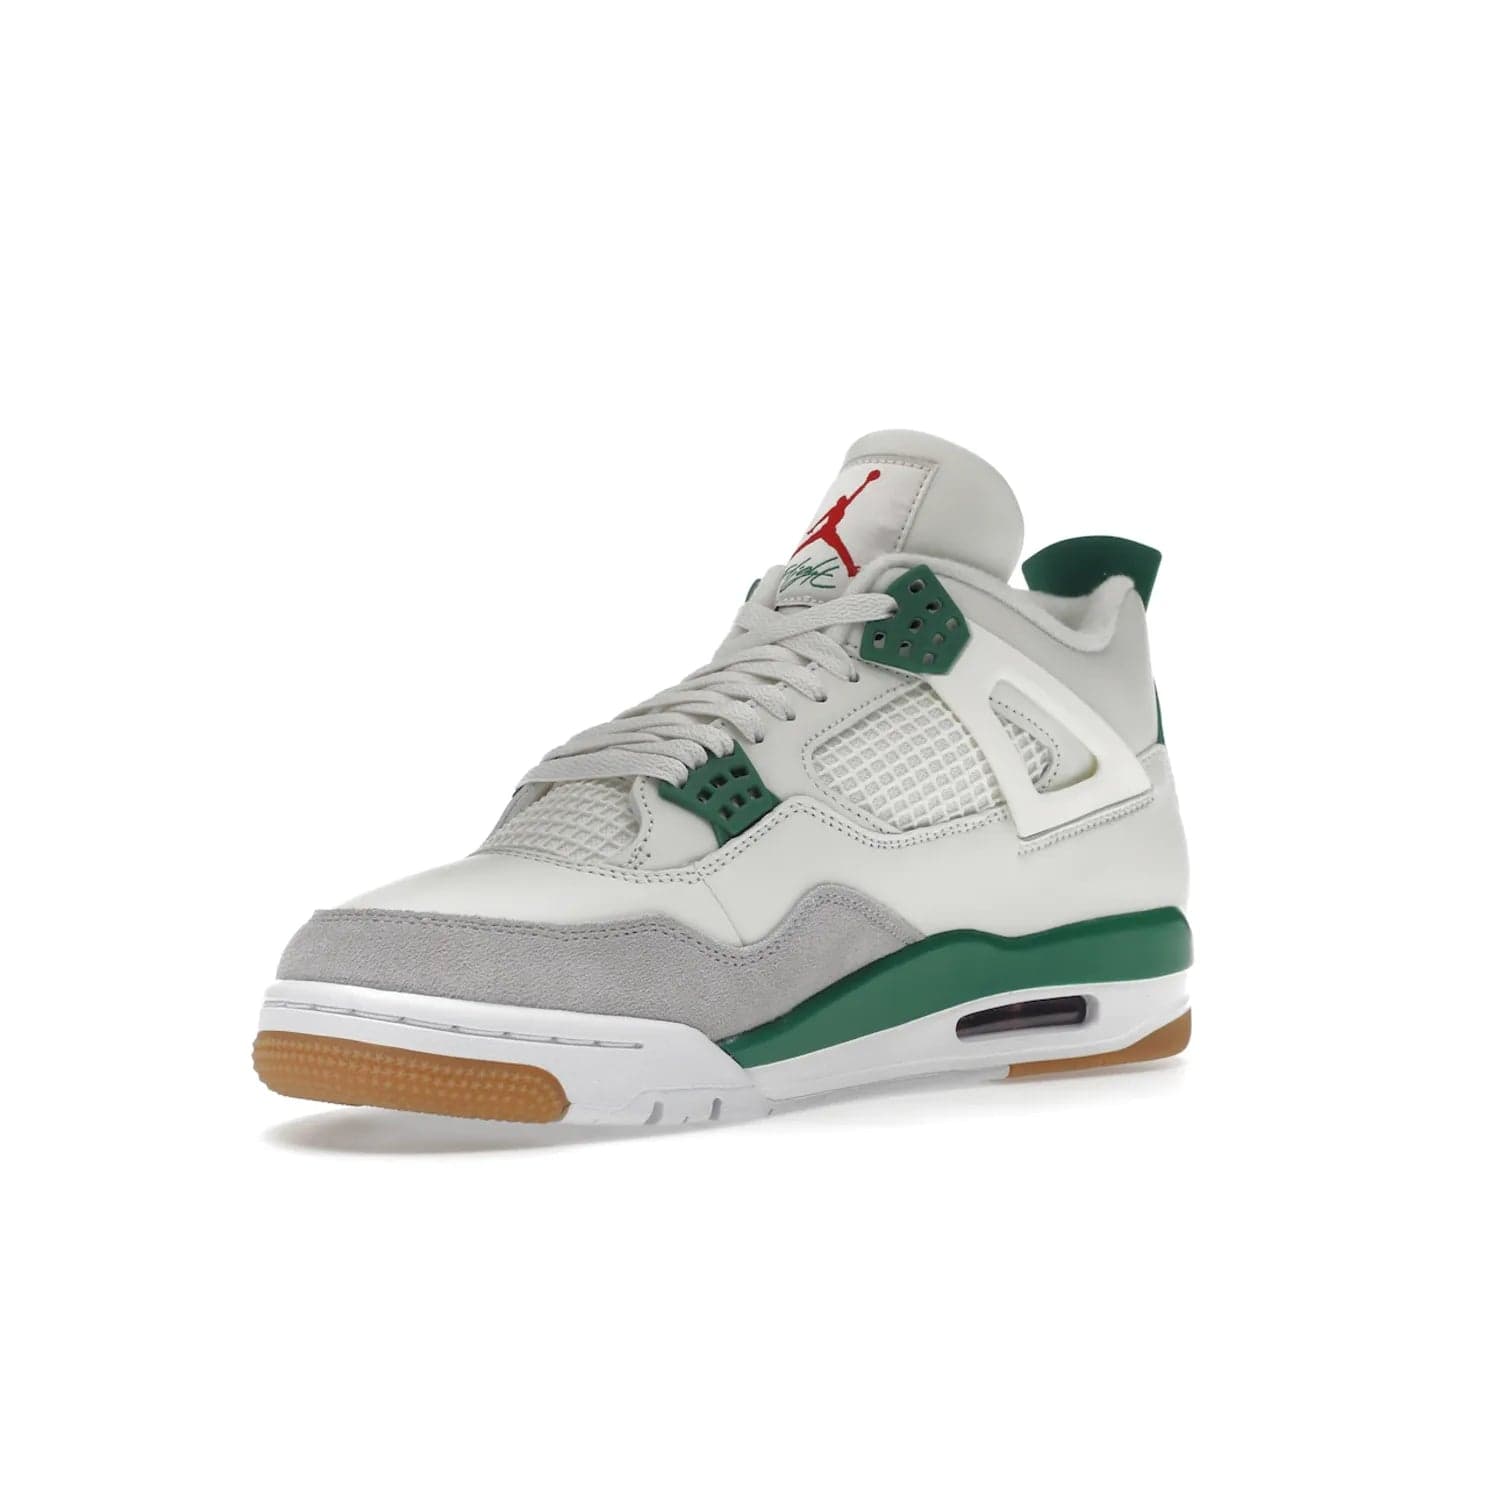 Jordan 4 Retro SB Pine Green - Image 15 - Only at www.BallersClubKickz.com - A white leather upper combined with a Neutral Grey suede mudguard gives this limited Air Jordan 4 Retro SB Pine Green sneaker its unmistakable style. Released March 20, 2023, the Jordan 4 Retro SB features a white and Pine Green midsole plus a red air unit with a gum outsole for grip. The perfect blend of Nike SB skateboarding and Jordan 4 classic design.